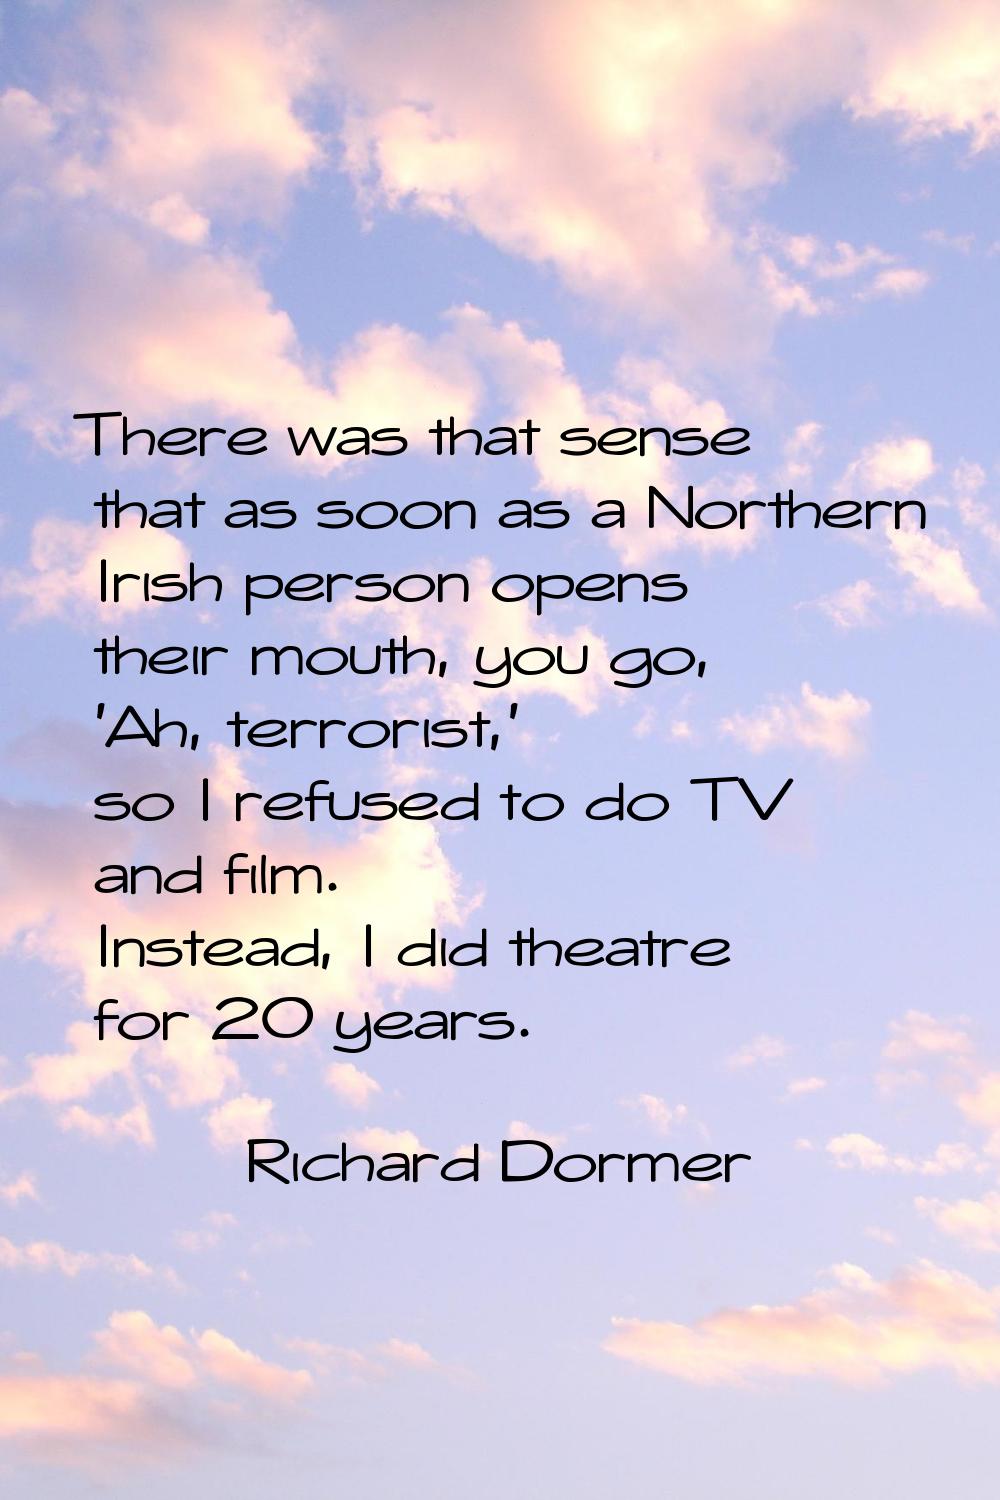 There was that sense that as soon as a Northern Irish person opens their mouth, you go, 'Ah, terror